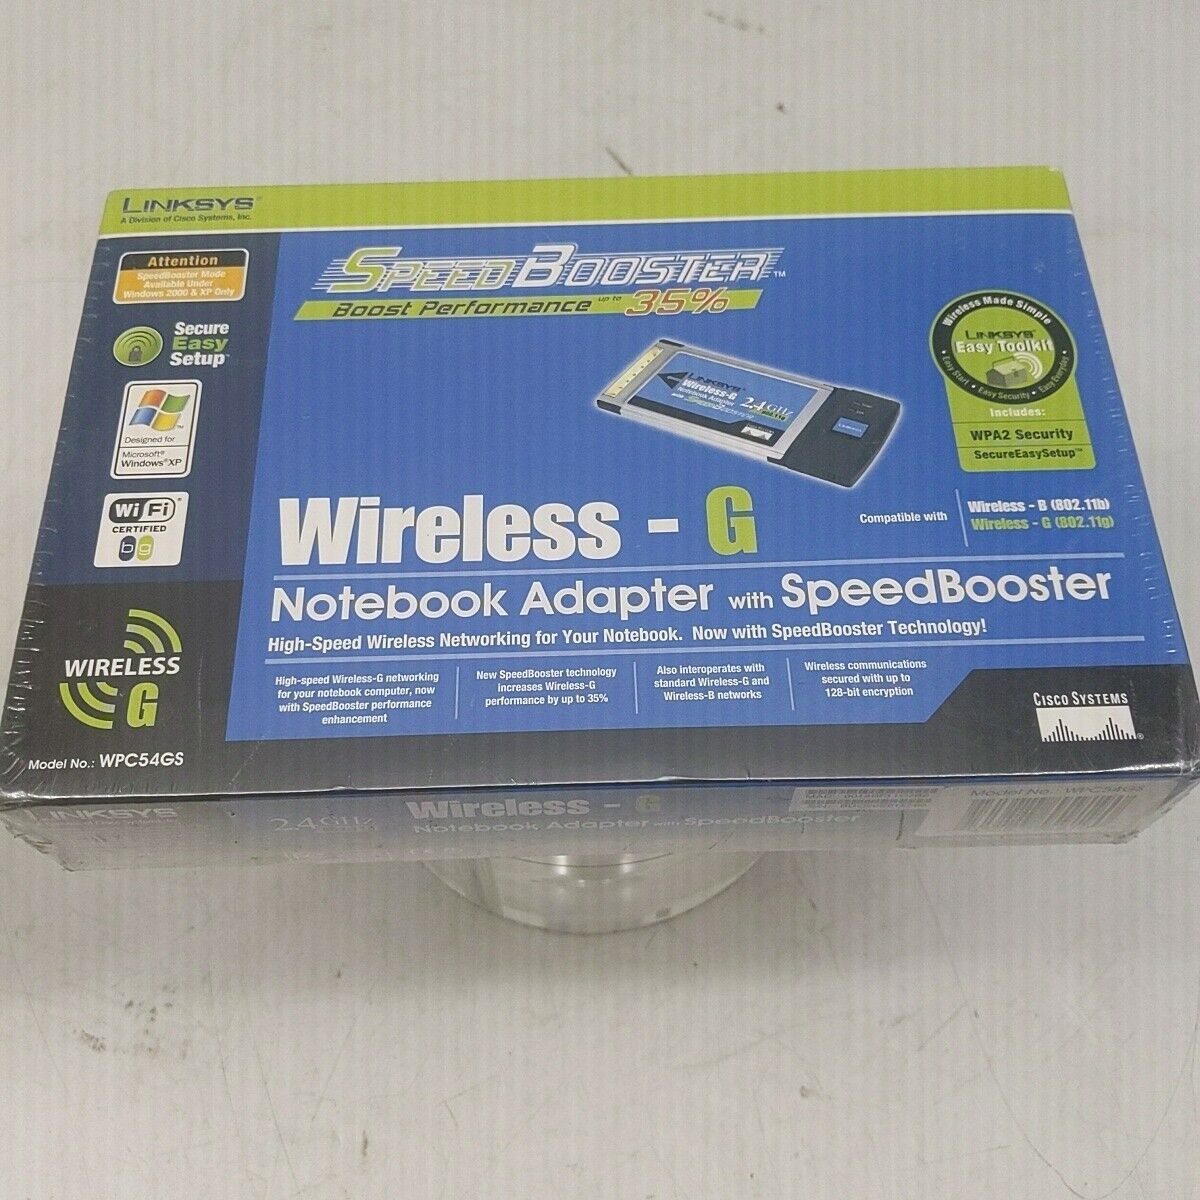 LINKSYS WIRELESS-G NOTEBOOK ADAPTER WITH SPEED BOOSTER